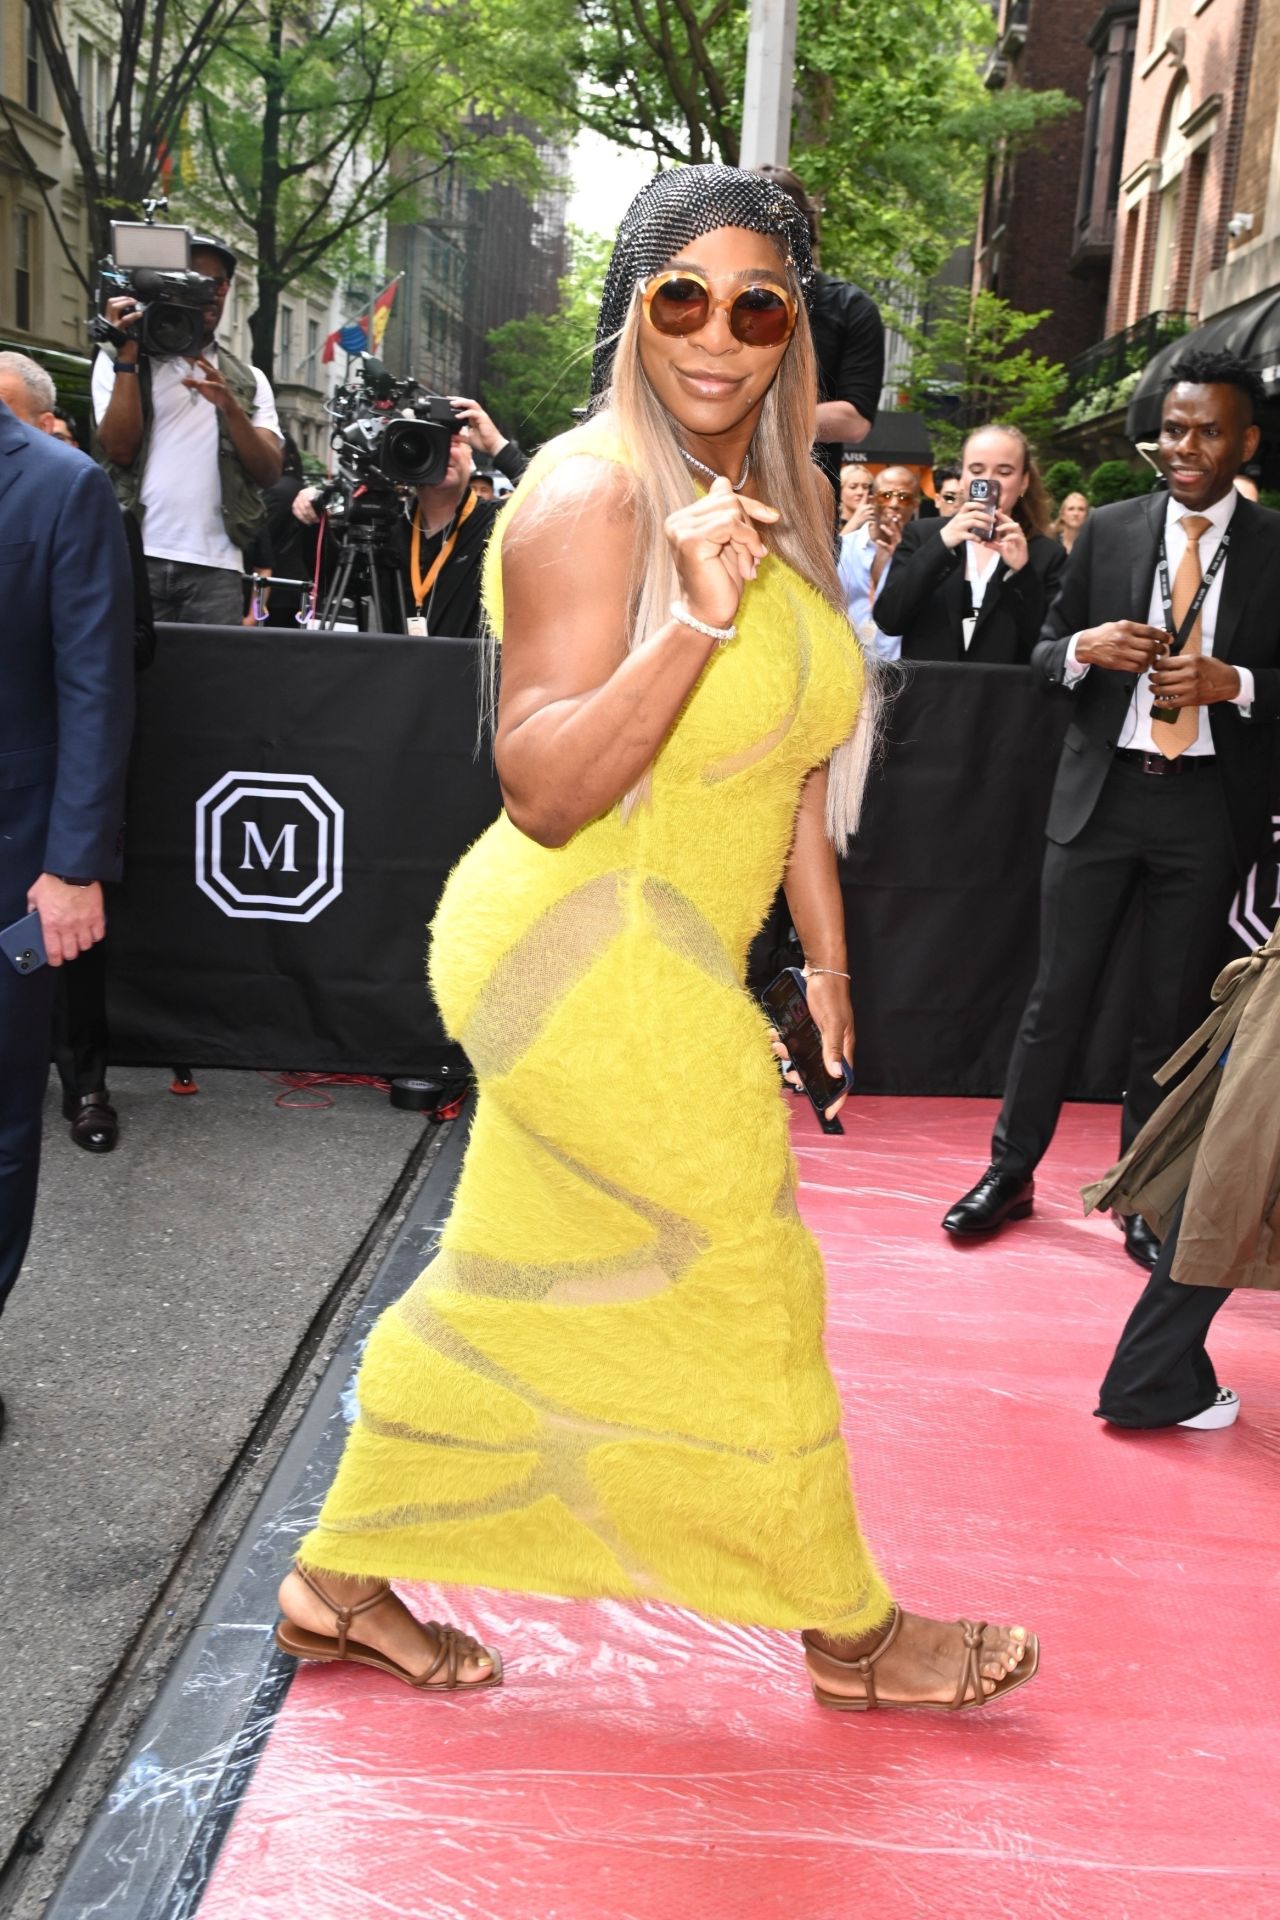 SERENA WILLIAMS IN A BRIGHT YELLOW DRESS IN NEW YORK